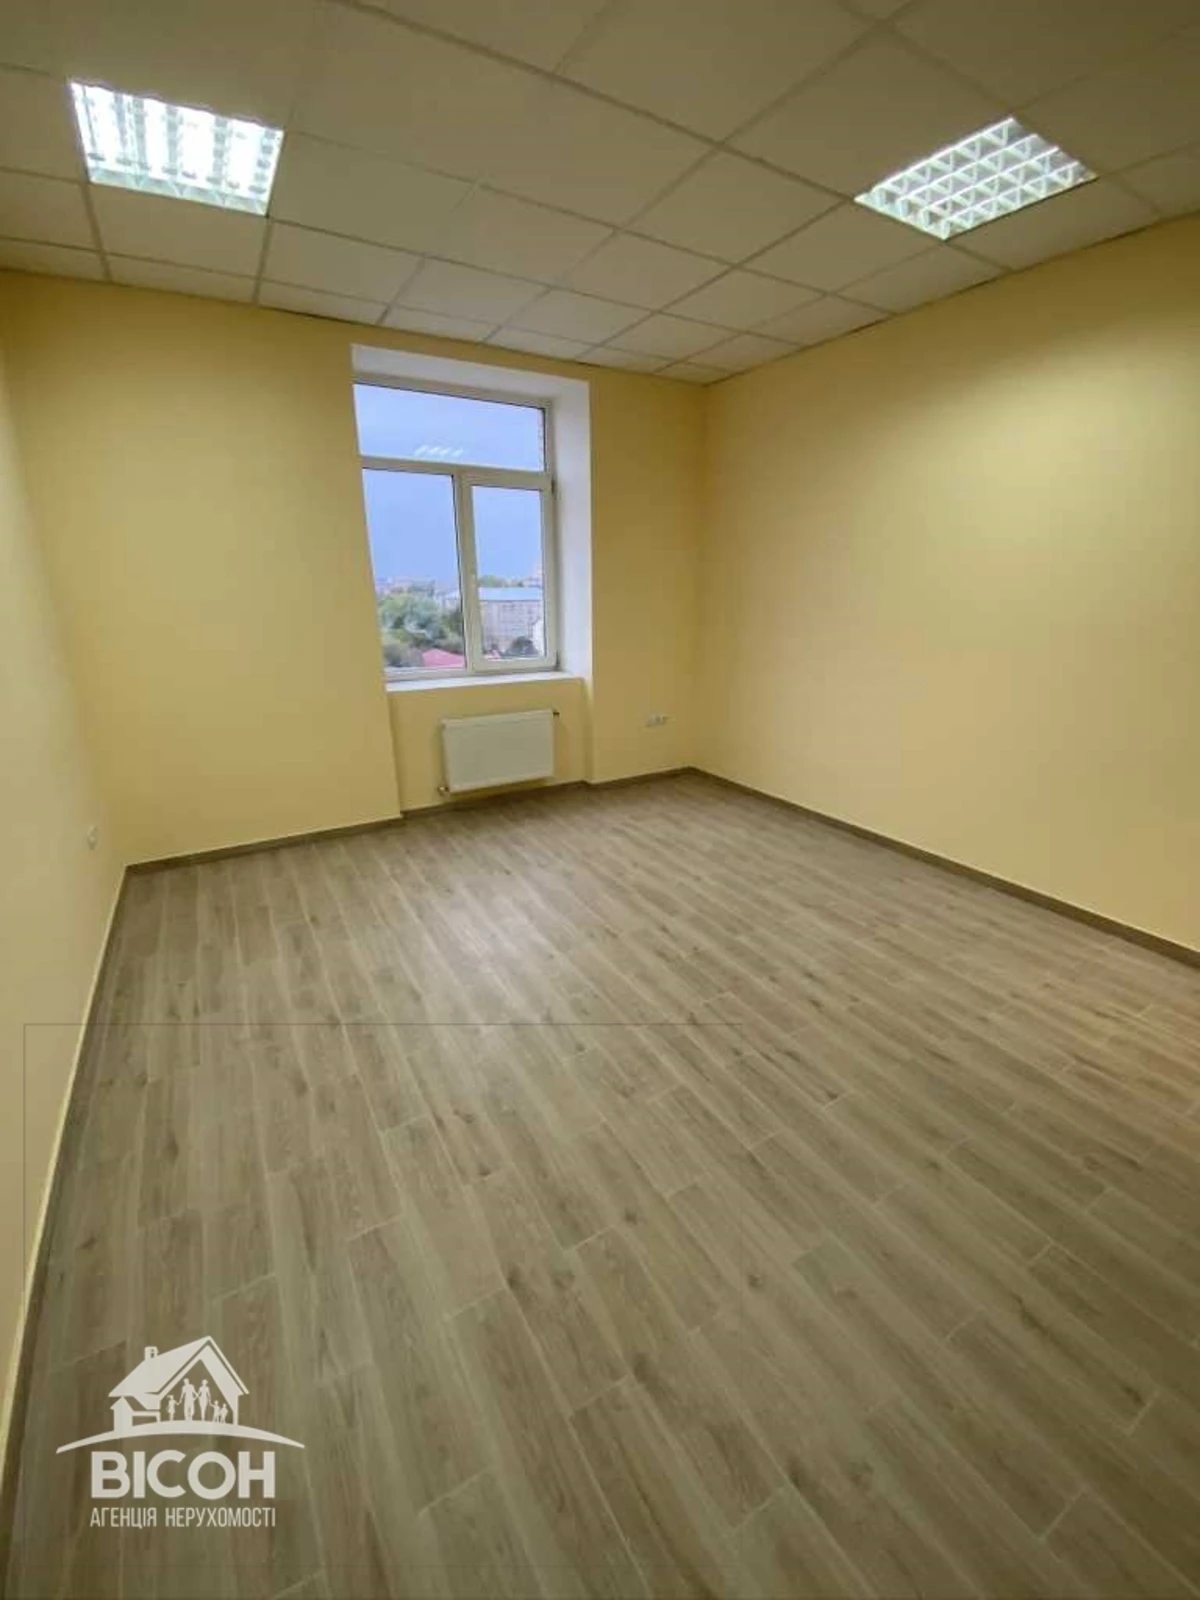 Real estate for sale for commercial purposes. 19 m², 9th floor/10 floors. Tsentr, Ternopil. 